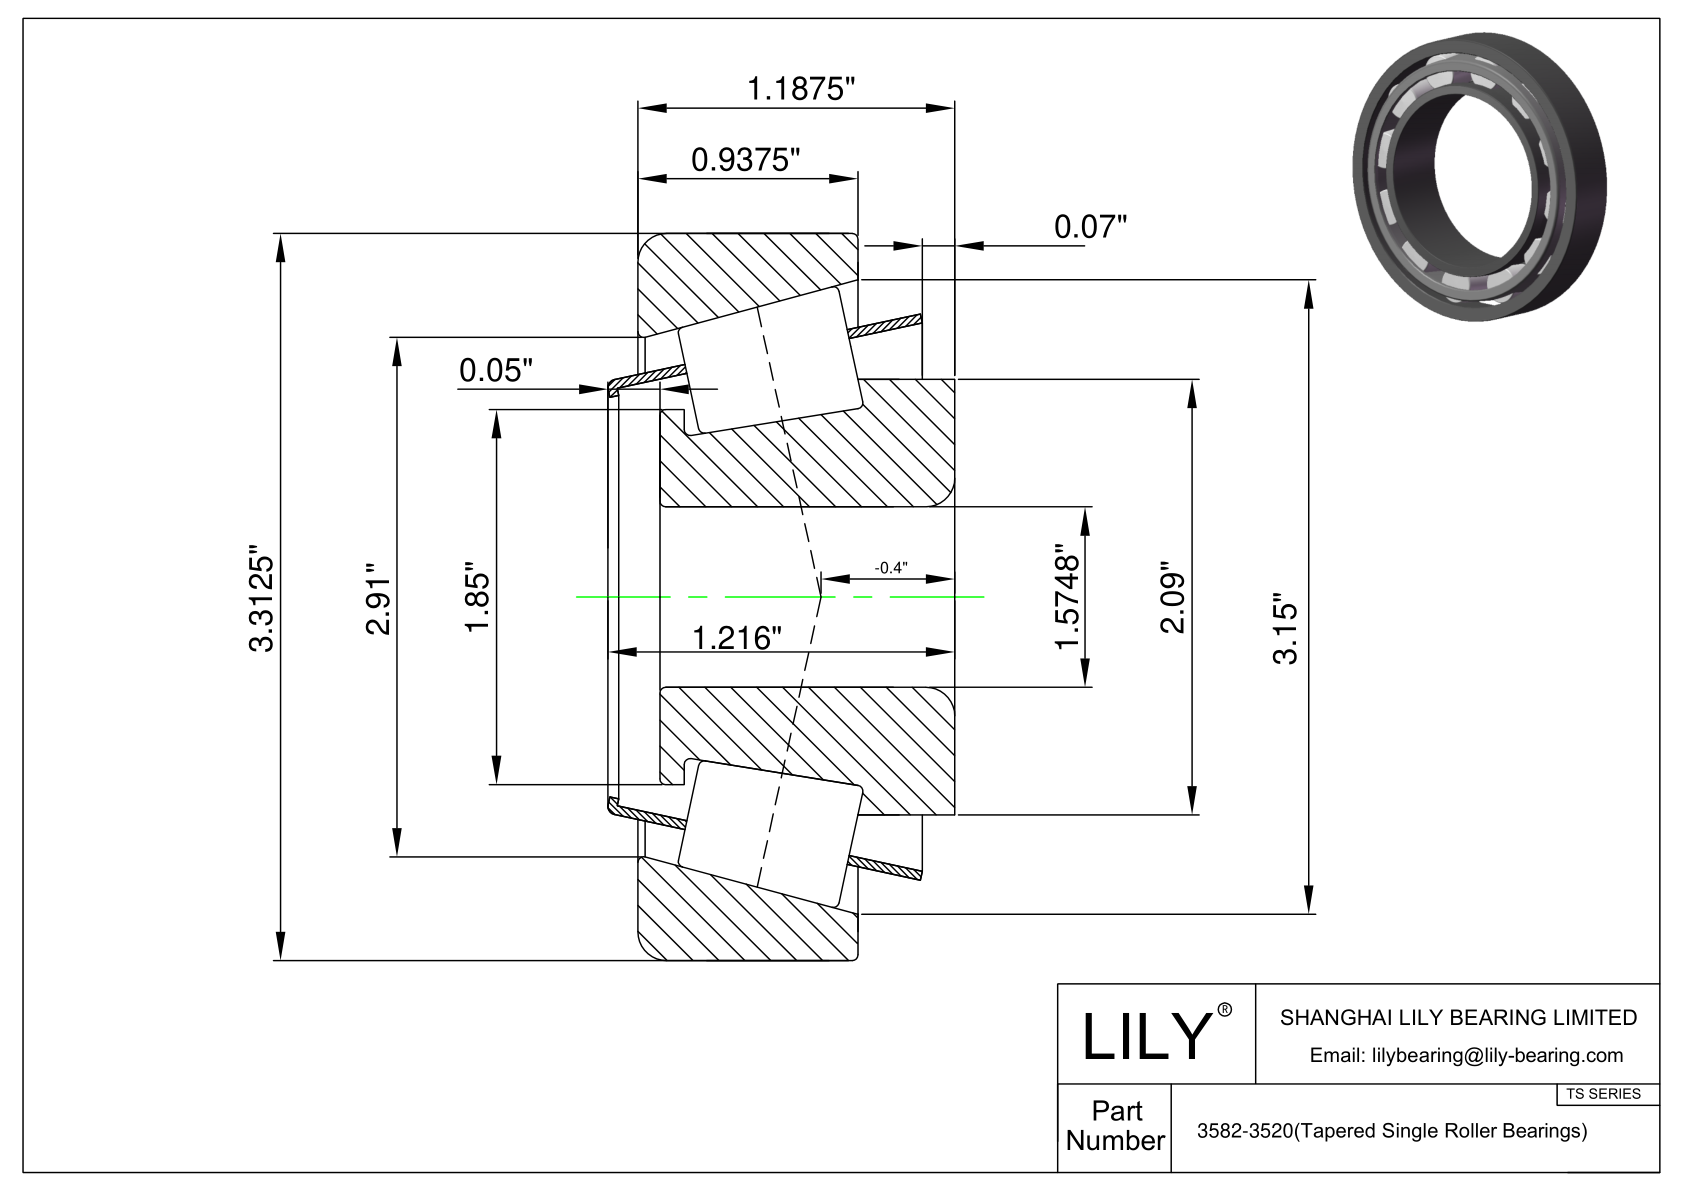 3582-3520 TS (Tapered Single Roller Bearings) (Imperial) cad drawing